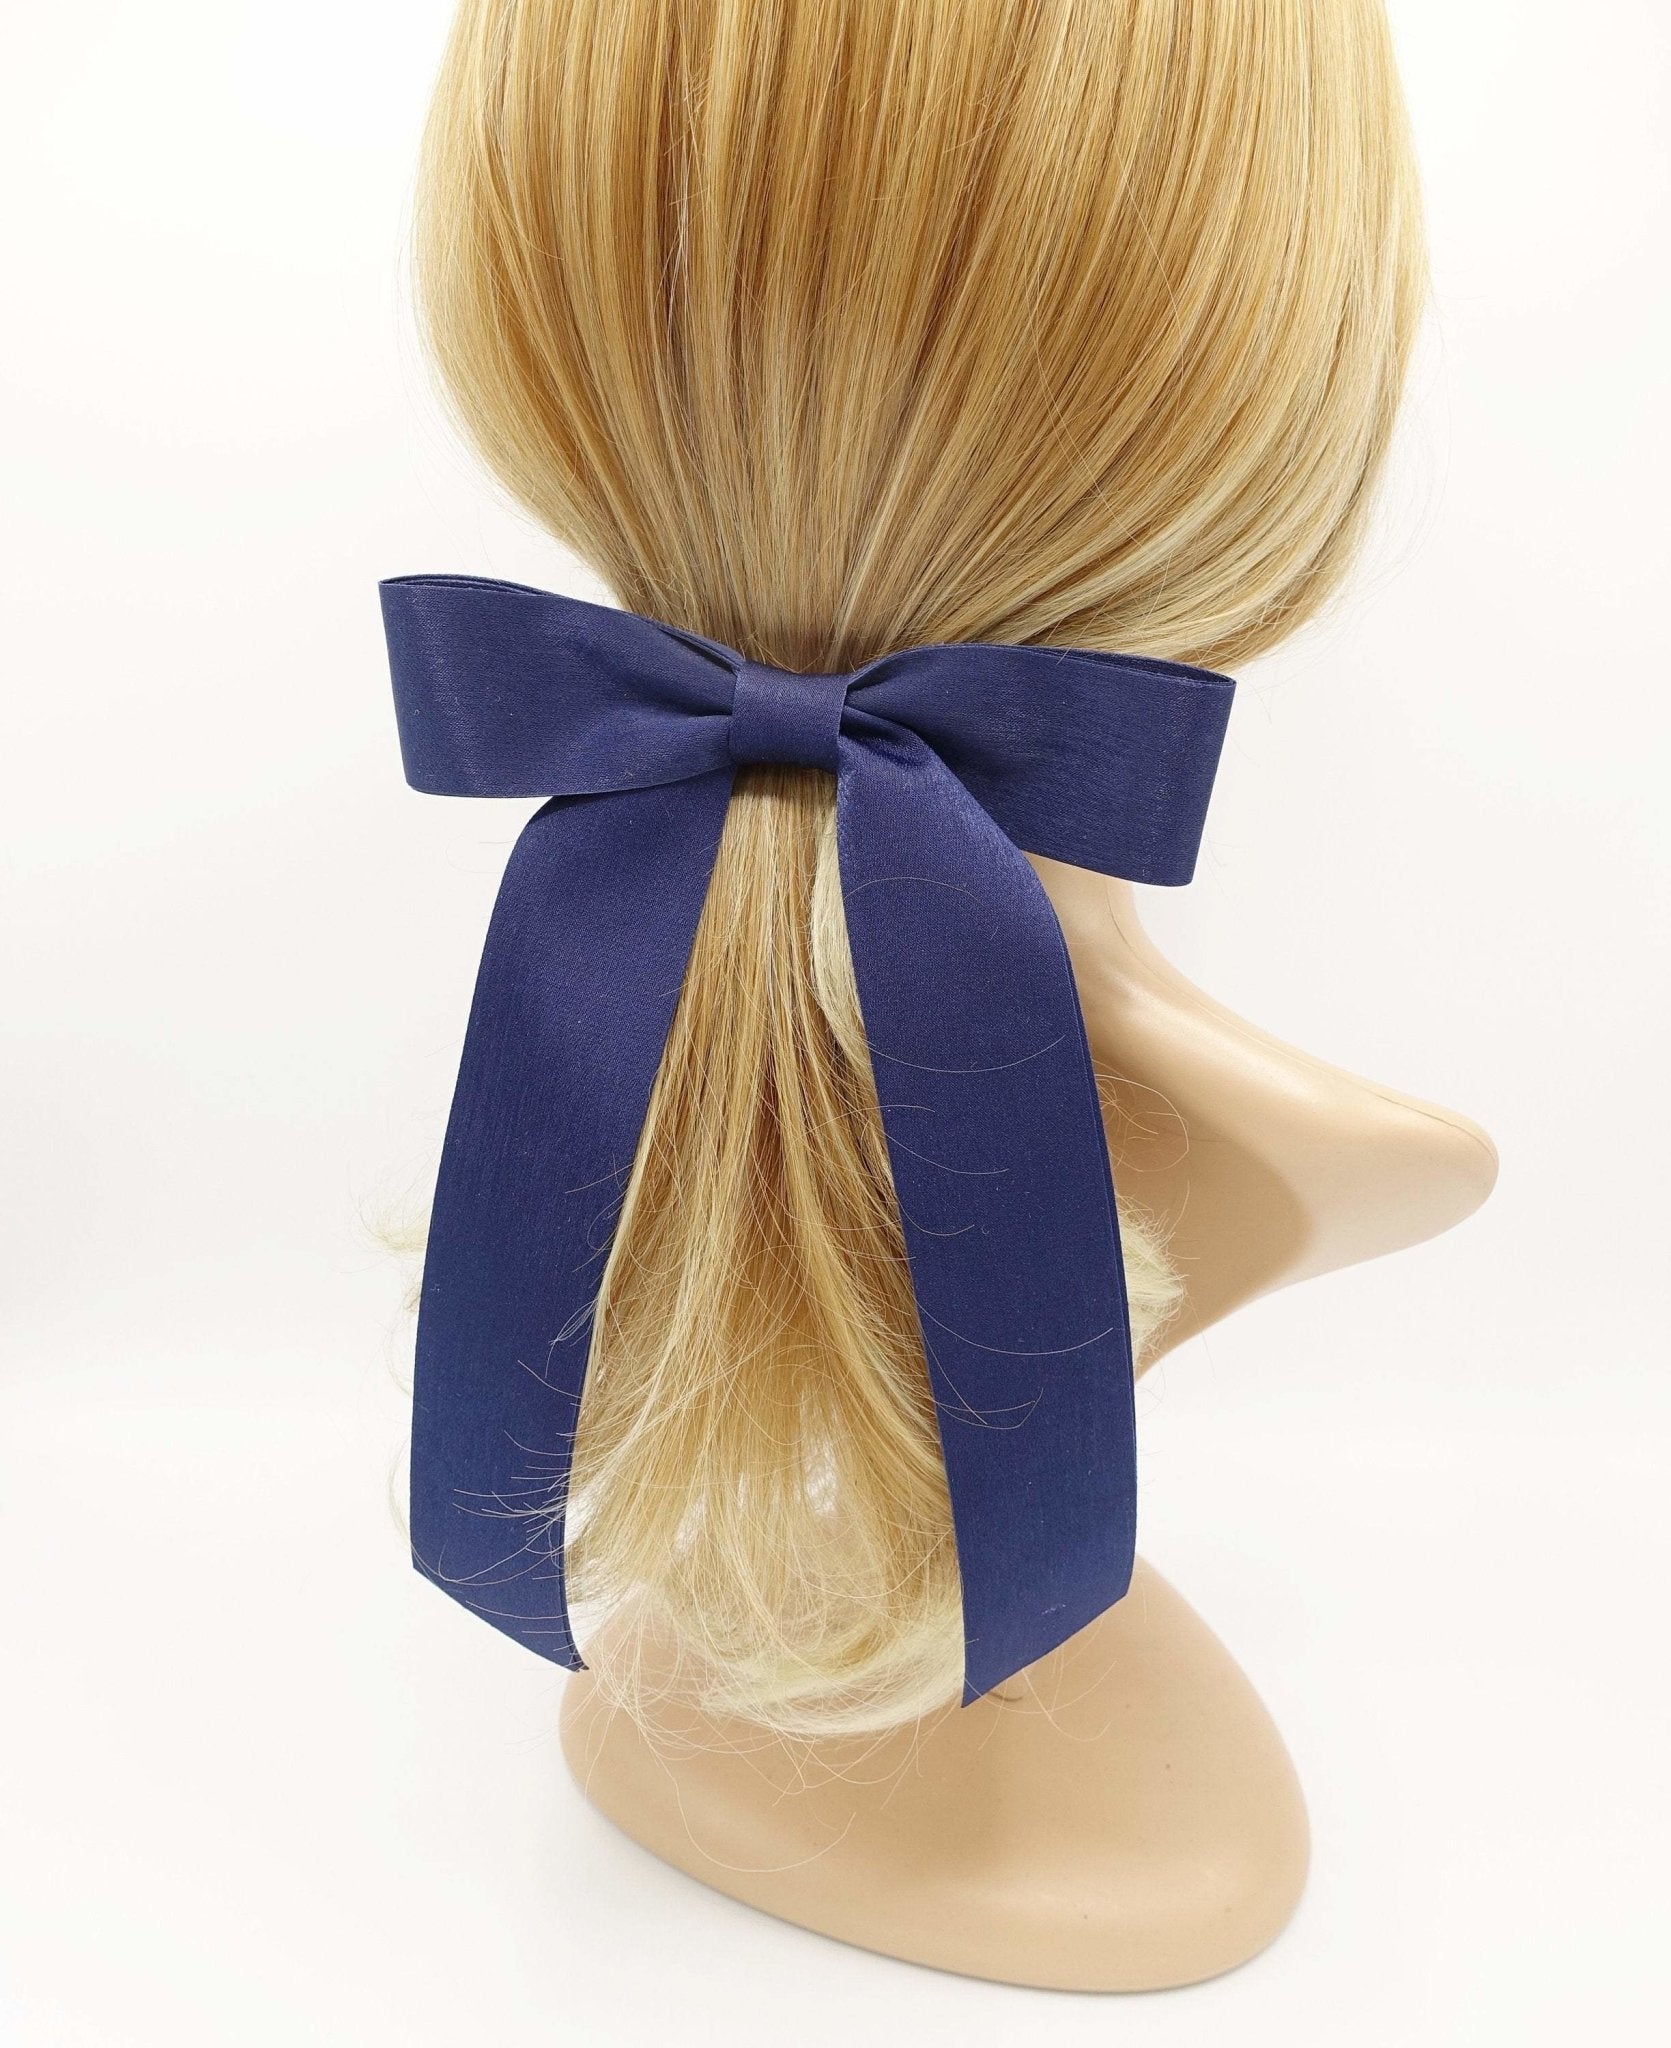 VeryShine claw/banana/barrette Navy satin layered hair bow standard size high quality hair accessory for women